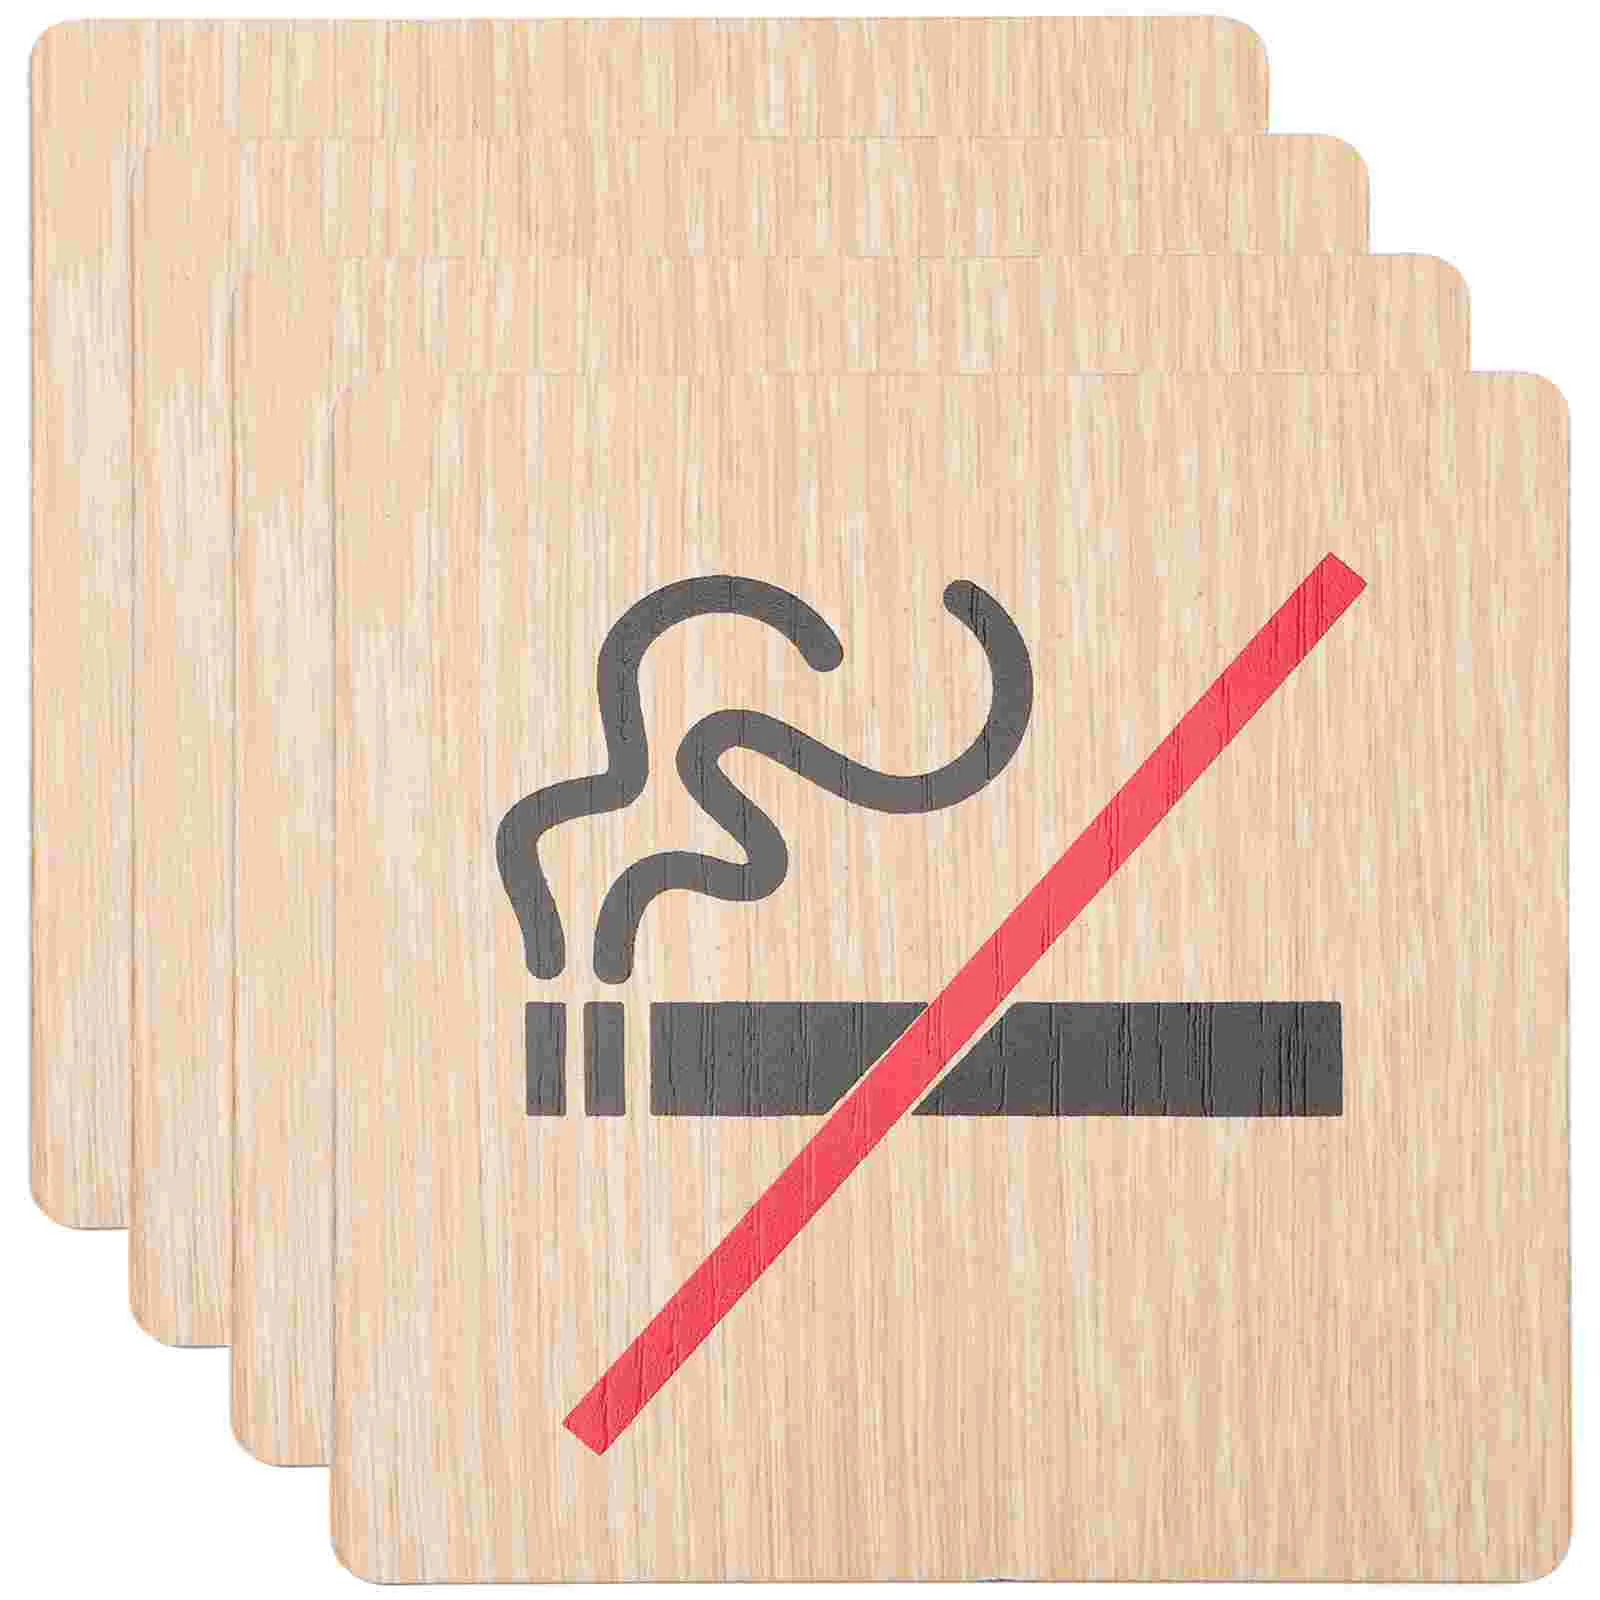 

4 Pcs No Smoking Sign Wooden Signs Hotel Warning Gas Station Label Stickers Reminding Boards